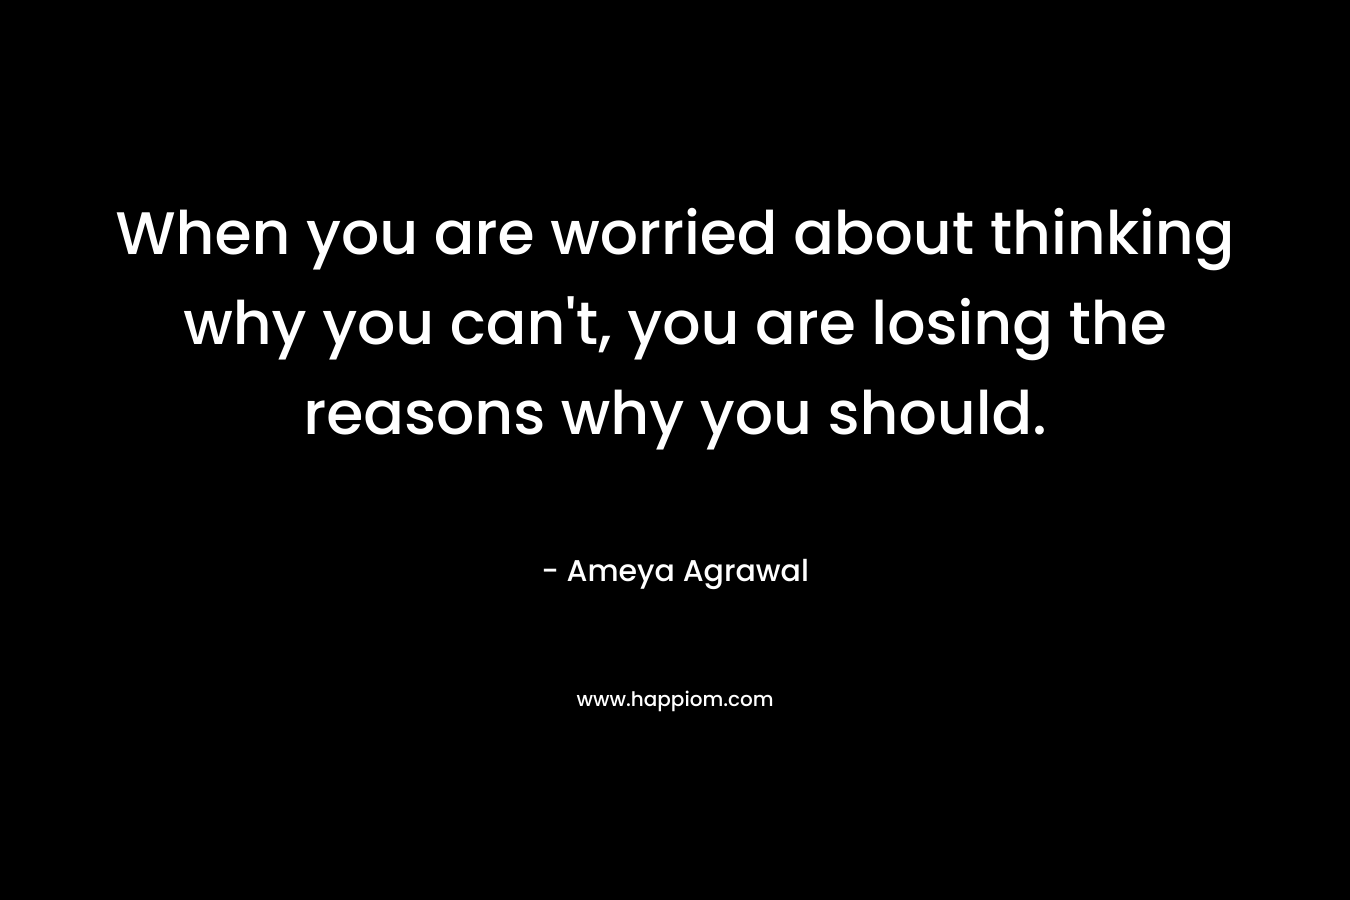 When you are worried about thinking why you can’t, you are losing the reasons why you should. – Ameya Agrawal